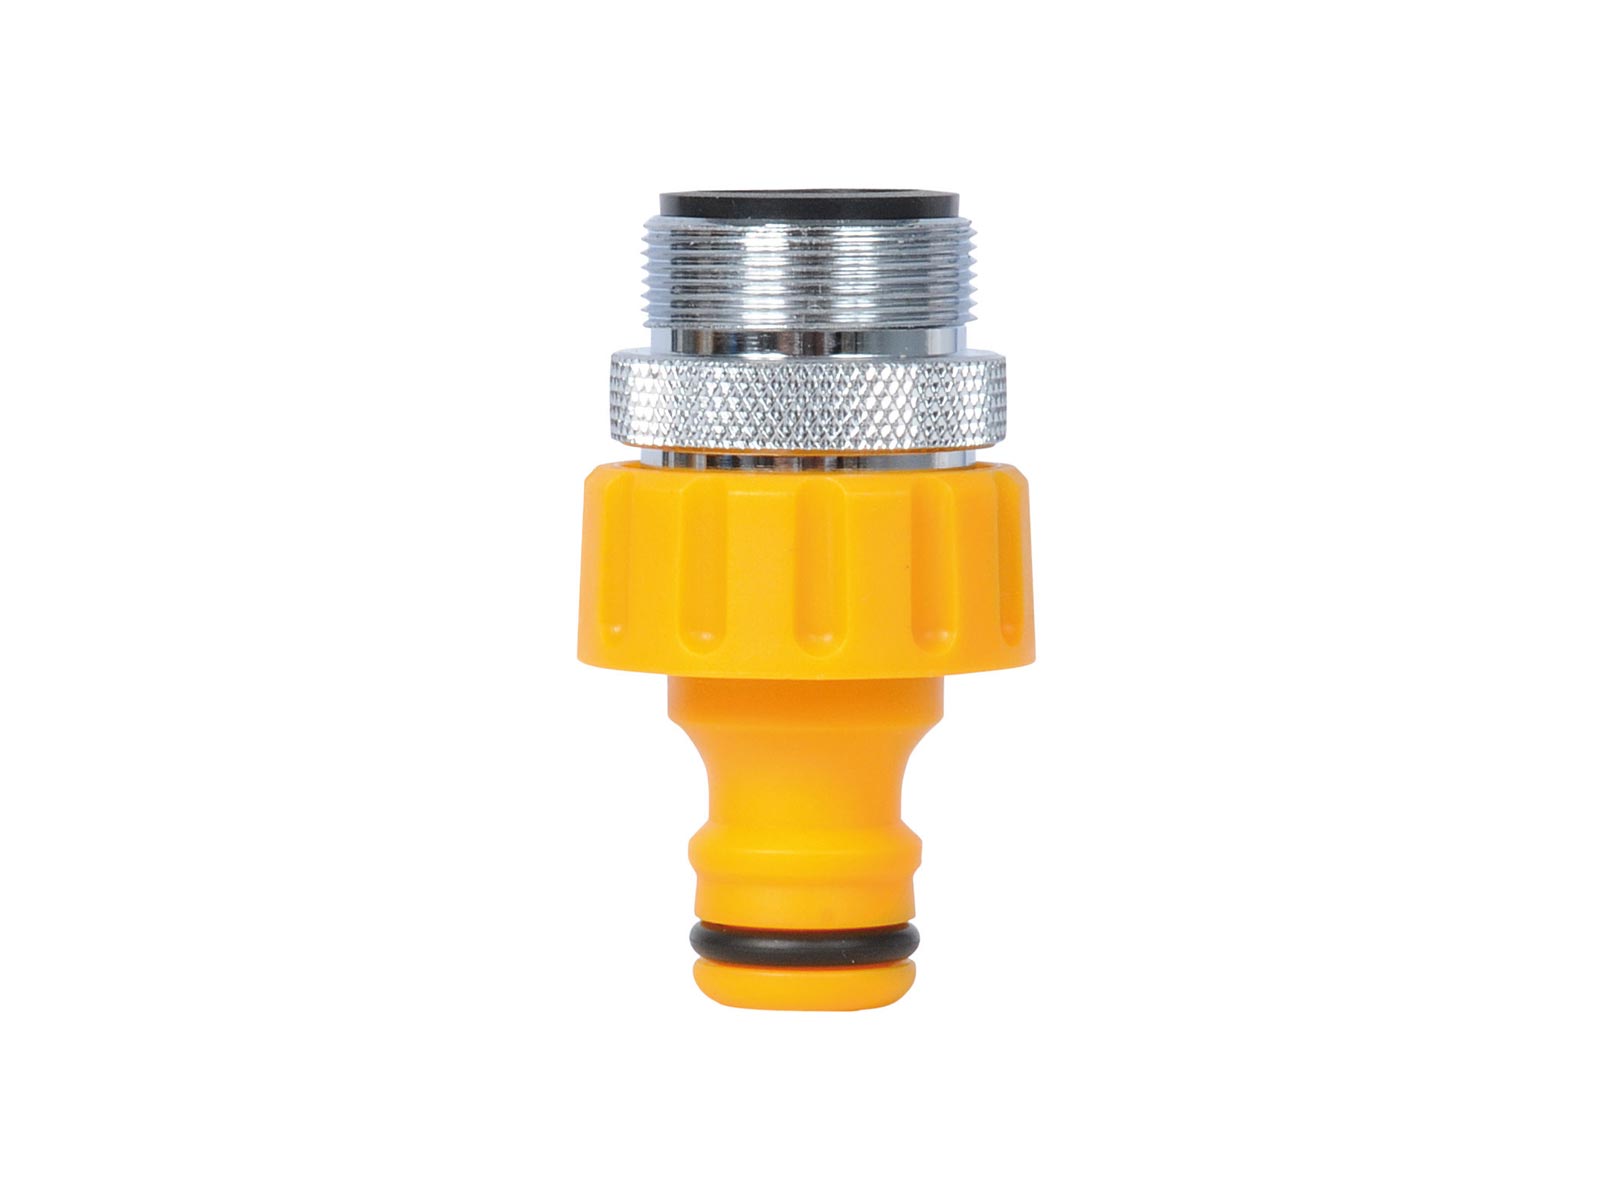 Hozelock Hozelock Tap Connector Hosepipe Hose Fitting Tap Connection 4/6 Points Standard 